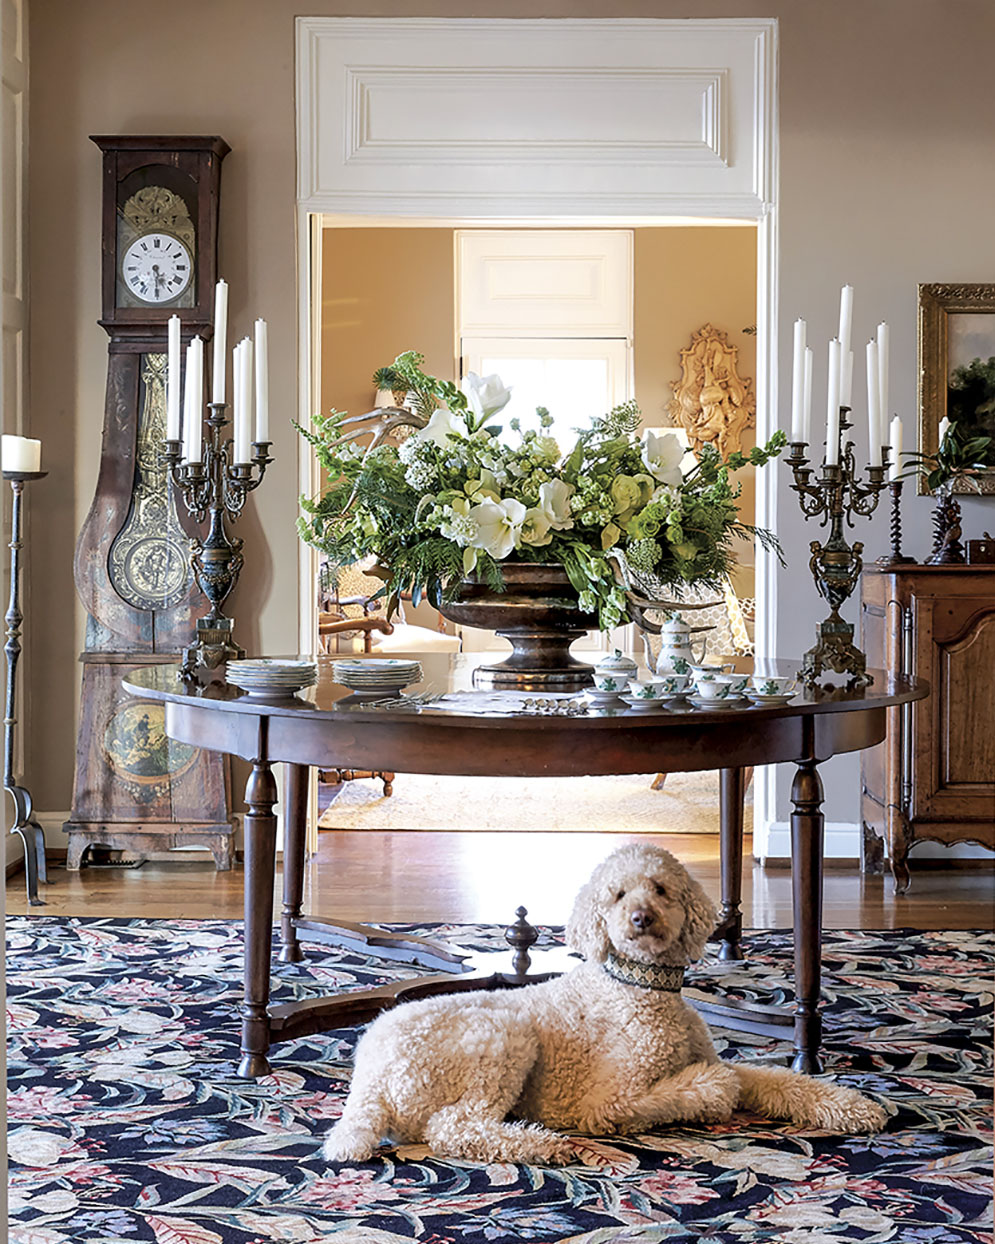 Grand green and white holiday floral design by  Kakhi Huffaker Wakefield of K Wakefield Designs, placed on a round entry table in an elegantly styled foyer. A dog lies beneath the table